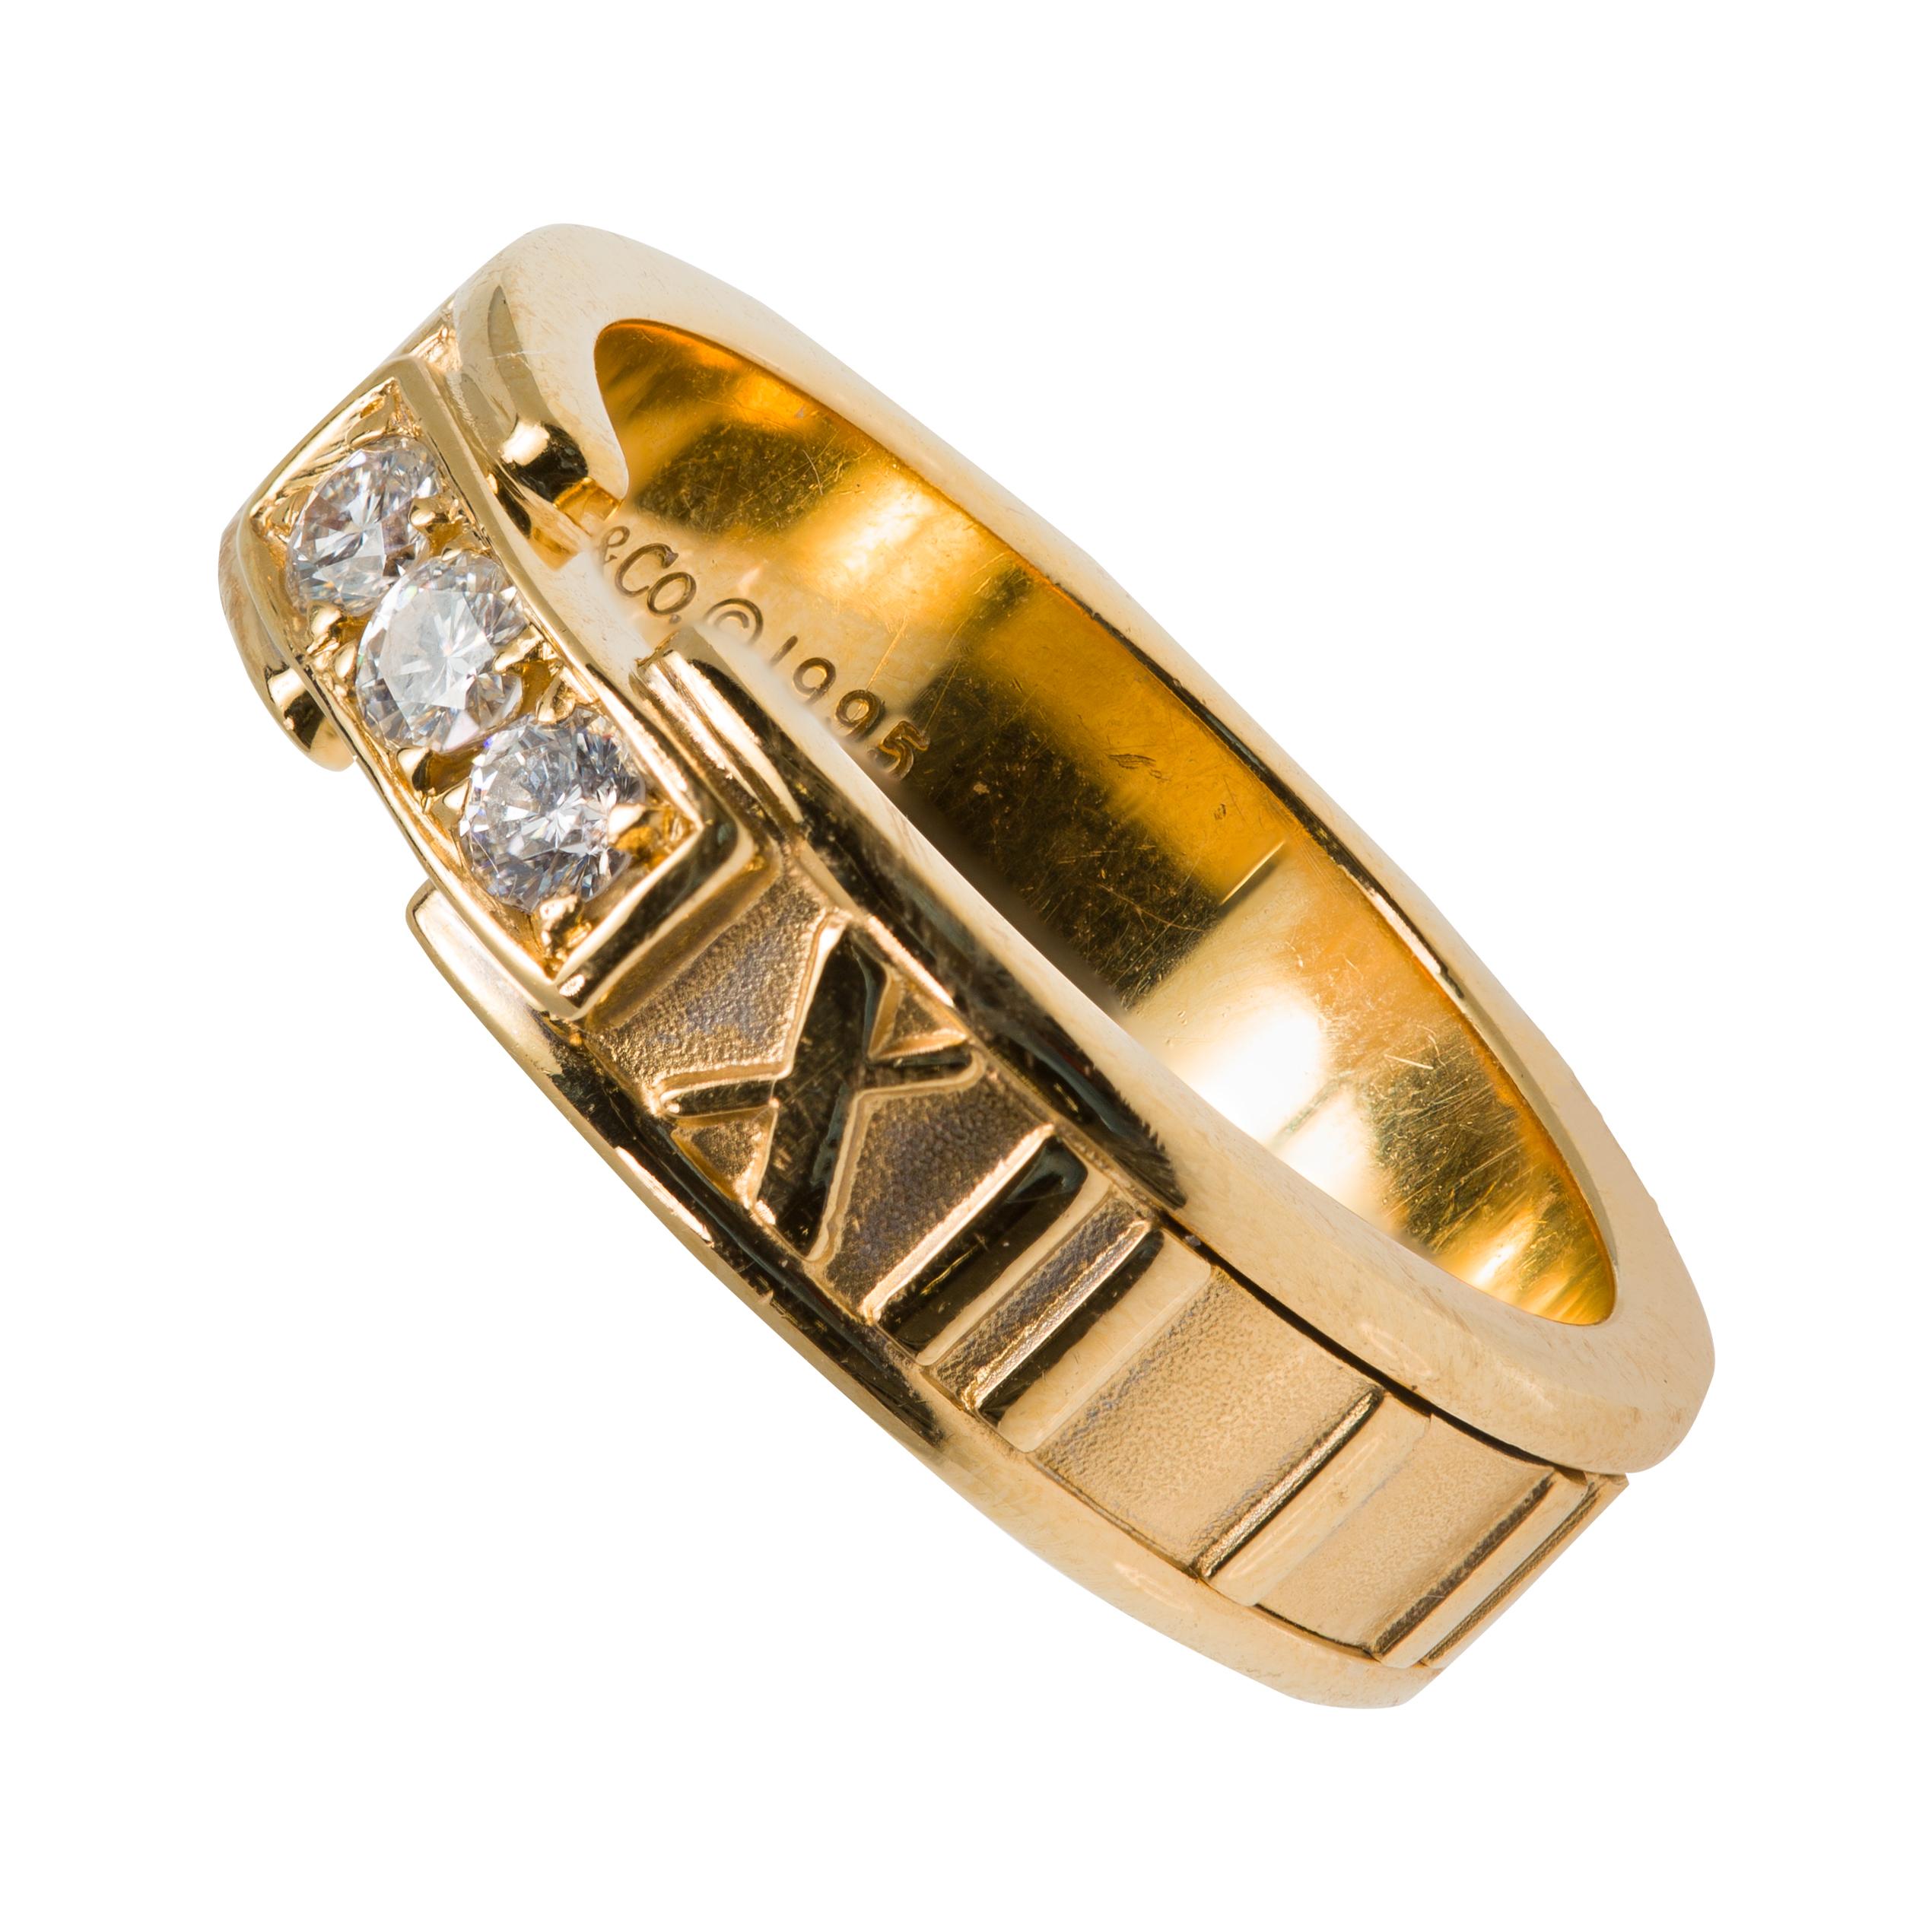 A signed Tiffany & Co. Atlas Roman Numeral design wedding ring circa 1995, with three Diamonds in 18K yellow gold, size 6.5. Created in the later years of the 20th century, this iconic Atlas Roman Numeral ring features three frontal full round-cut